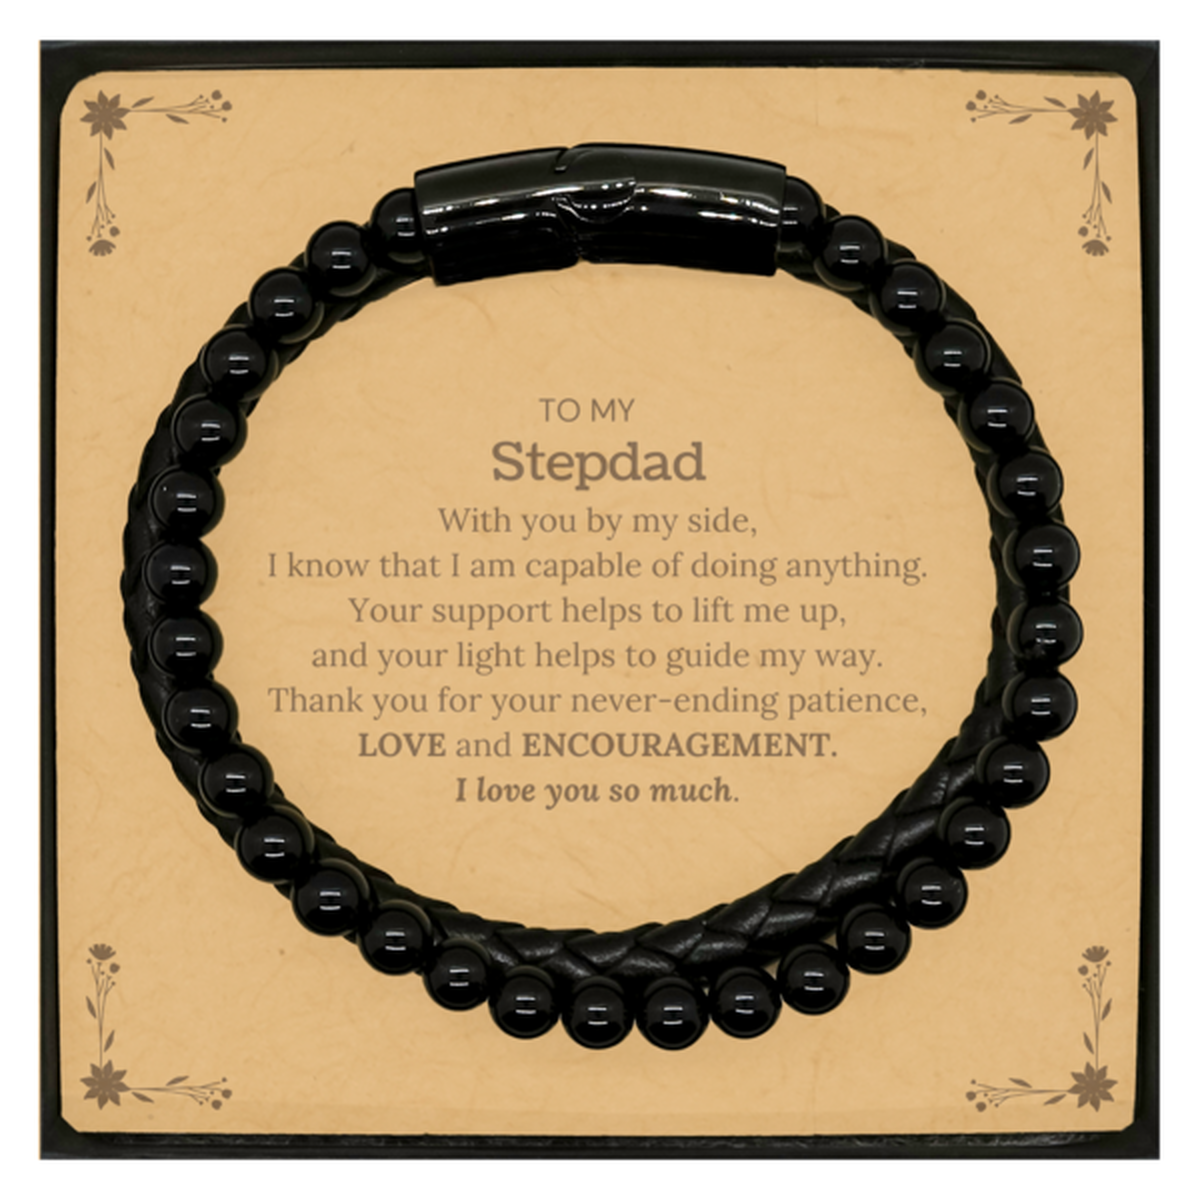 Appreciation Stepdad Stone Leather Bracelets Gifts, To My Stepdad Birthday Christmas Wedding Keepsake Gifts for Stepdad With you by my side, I know that I am capable of doing anything. I love you so much